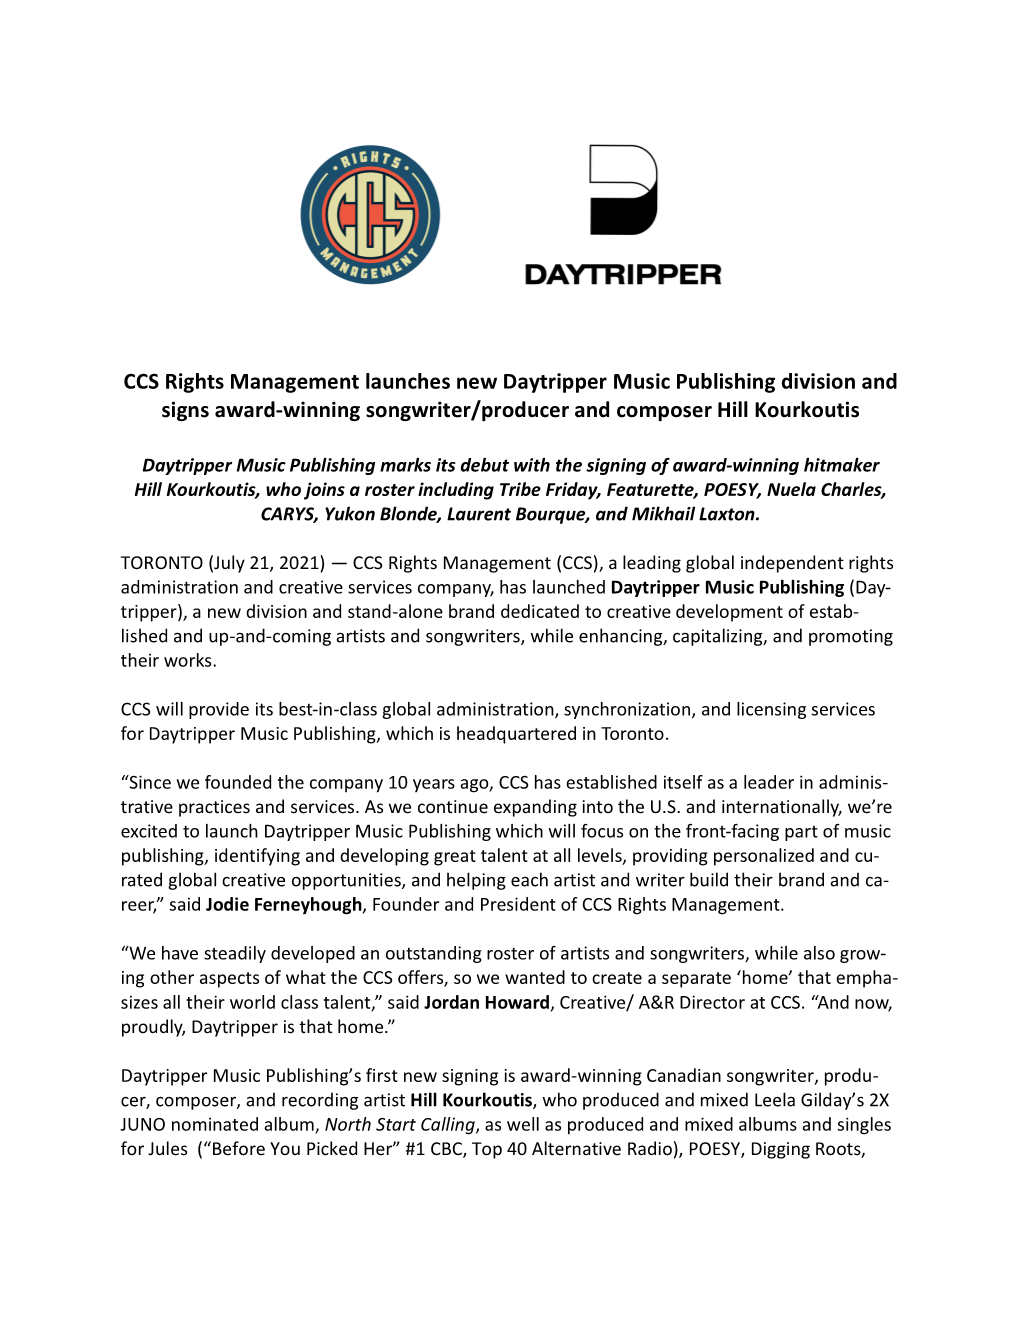 CCS Rights Management Launches New Daytripper Music Publishing Division and Signs Award-Winning Songwriter/Producer and Composer Hill Kourkoutis